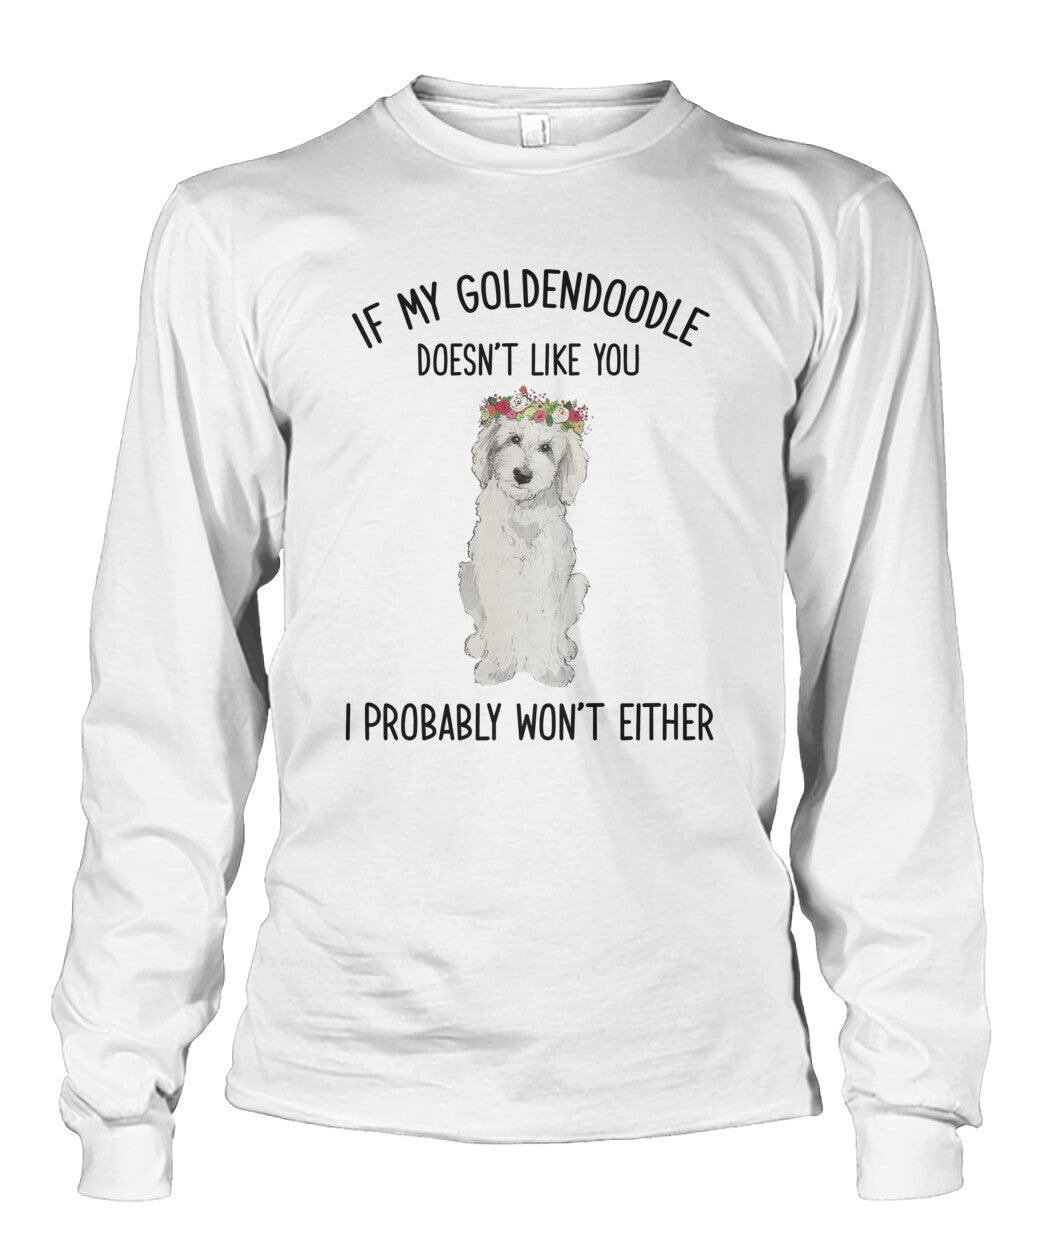 Goldendoodle Unisex Long Sleeve- If My Goldendoodle Doesn't You I Probably Wont Either Unisex Long Sleeve - Gift for Dog Lovers, Family, Friends - Amzanimalsgift